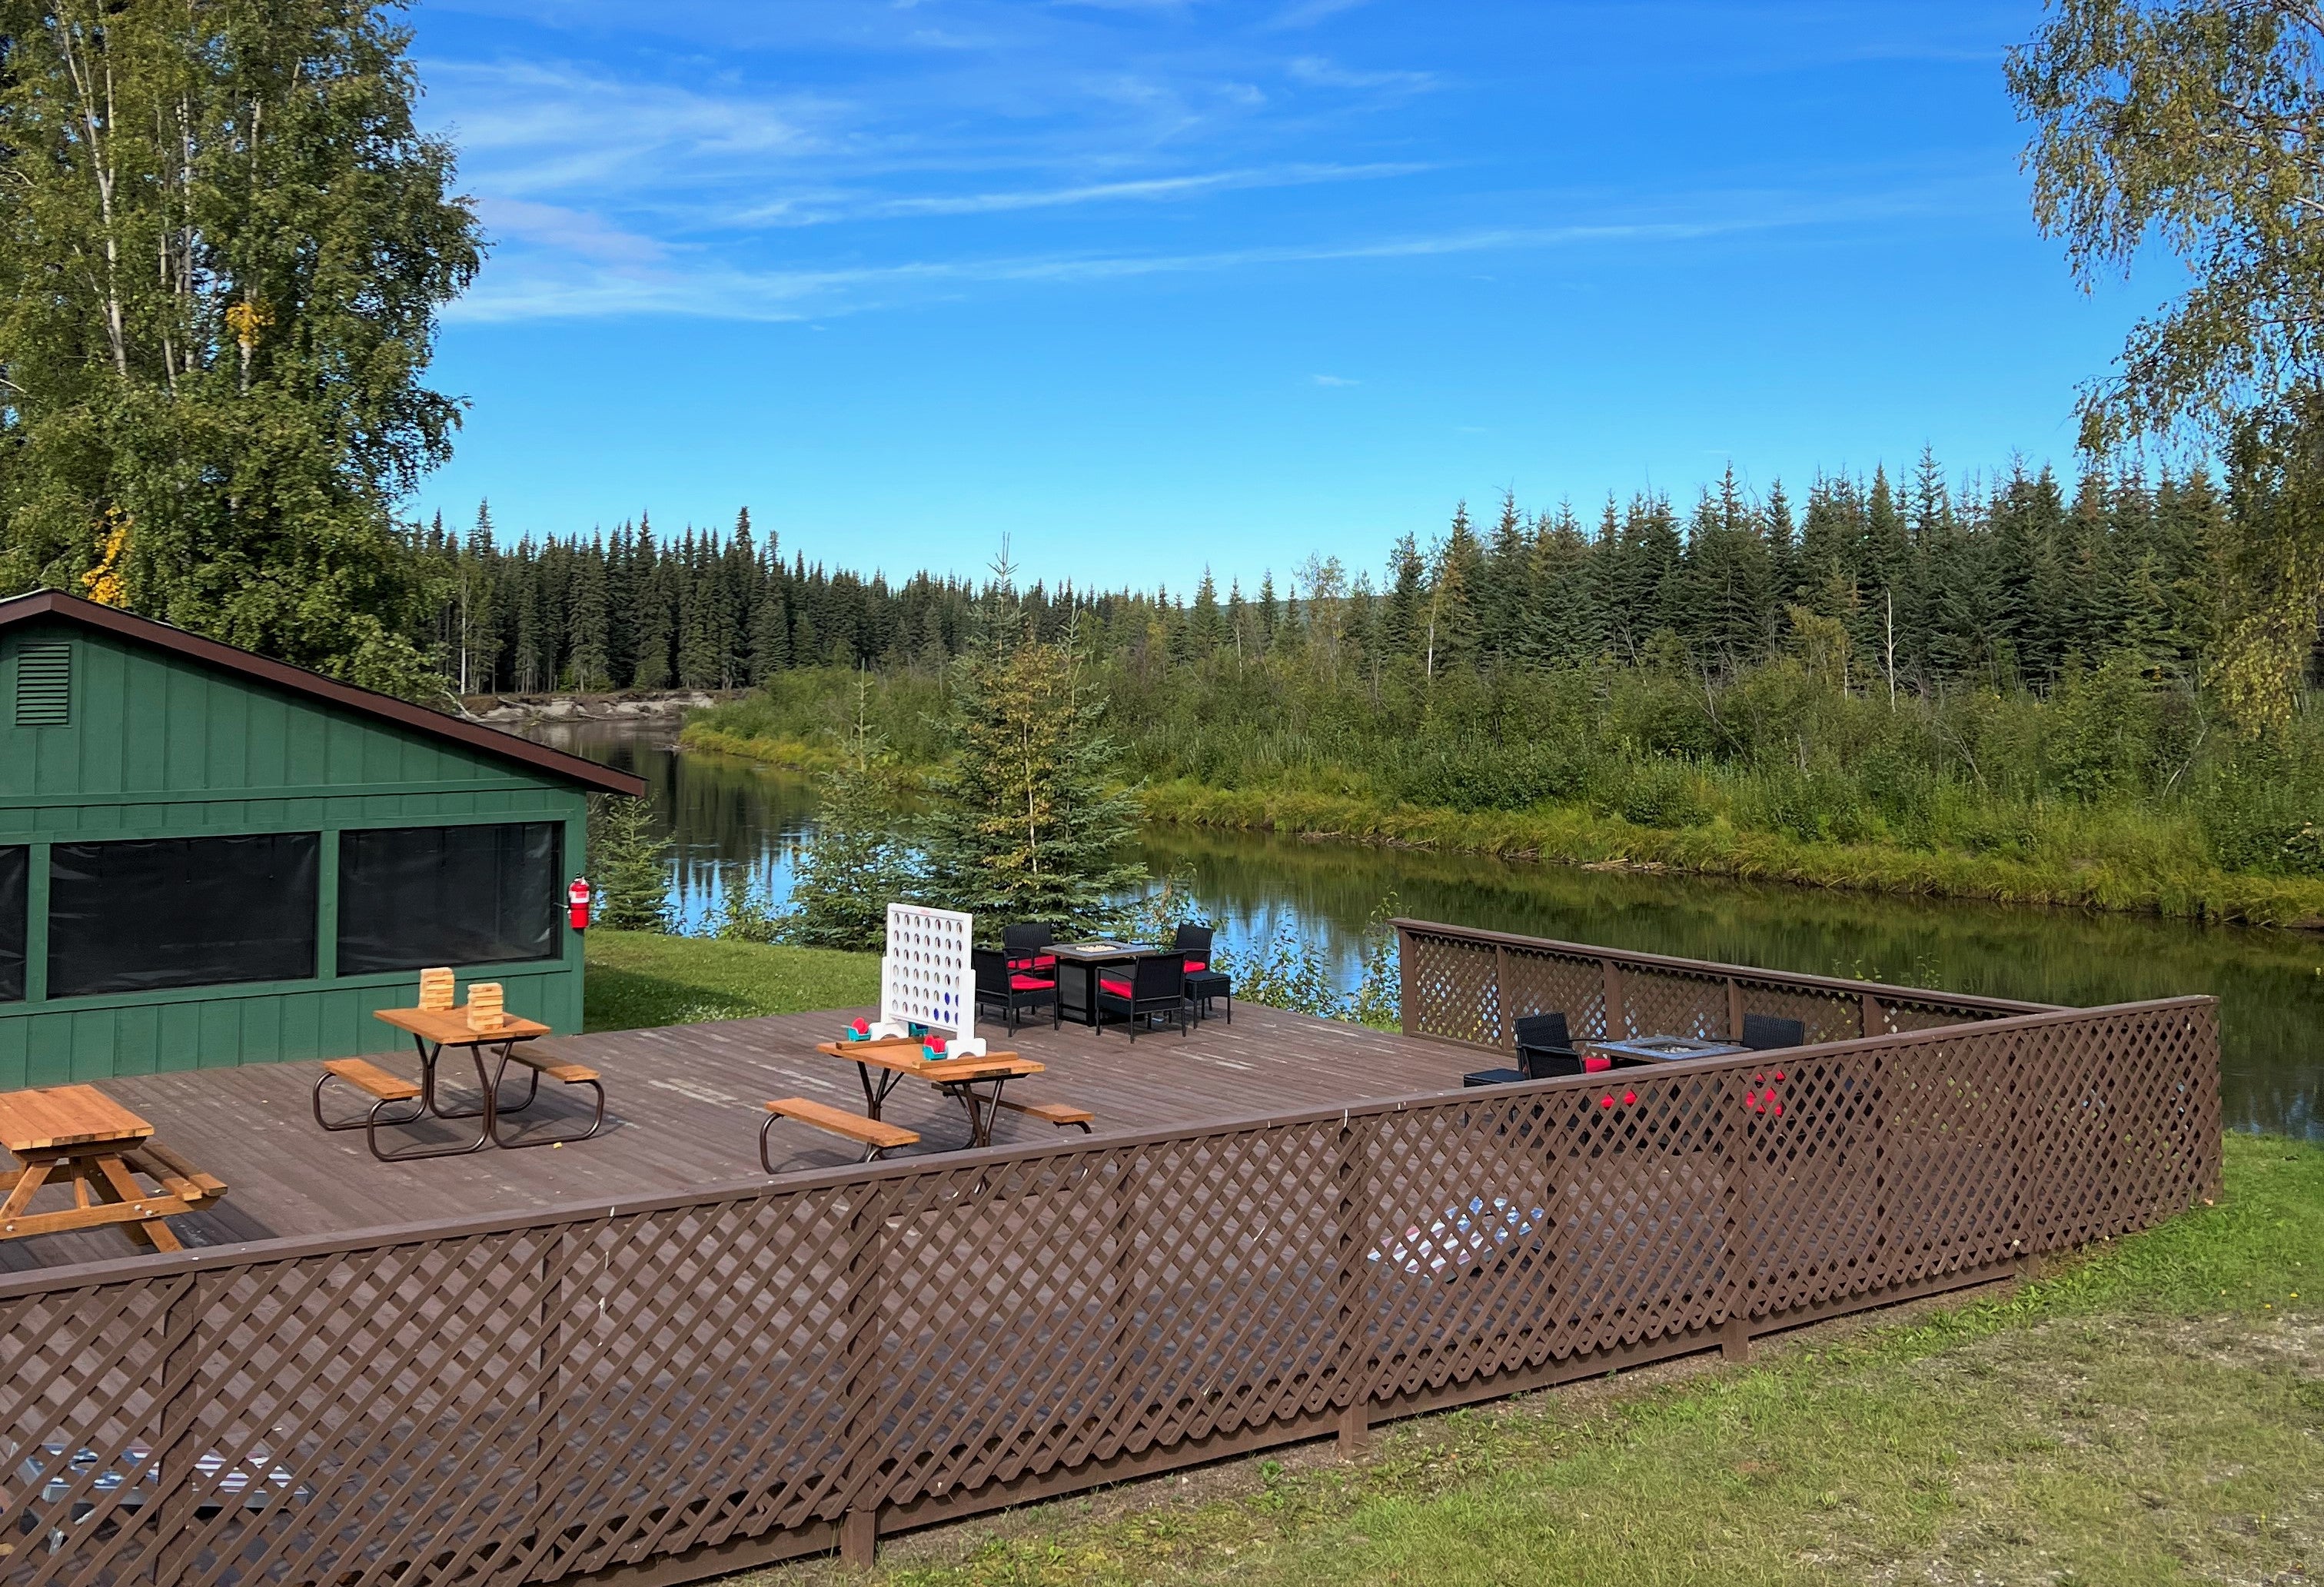 Camper submitted image from Fairbanks / Chena River KOA - 1